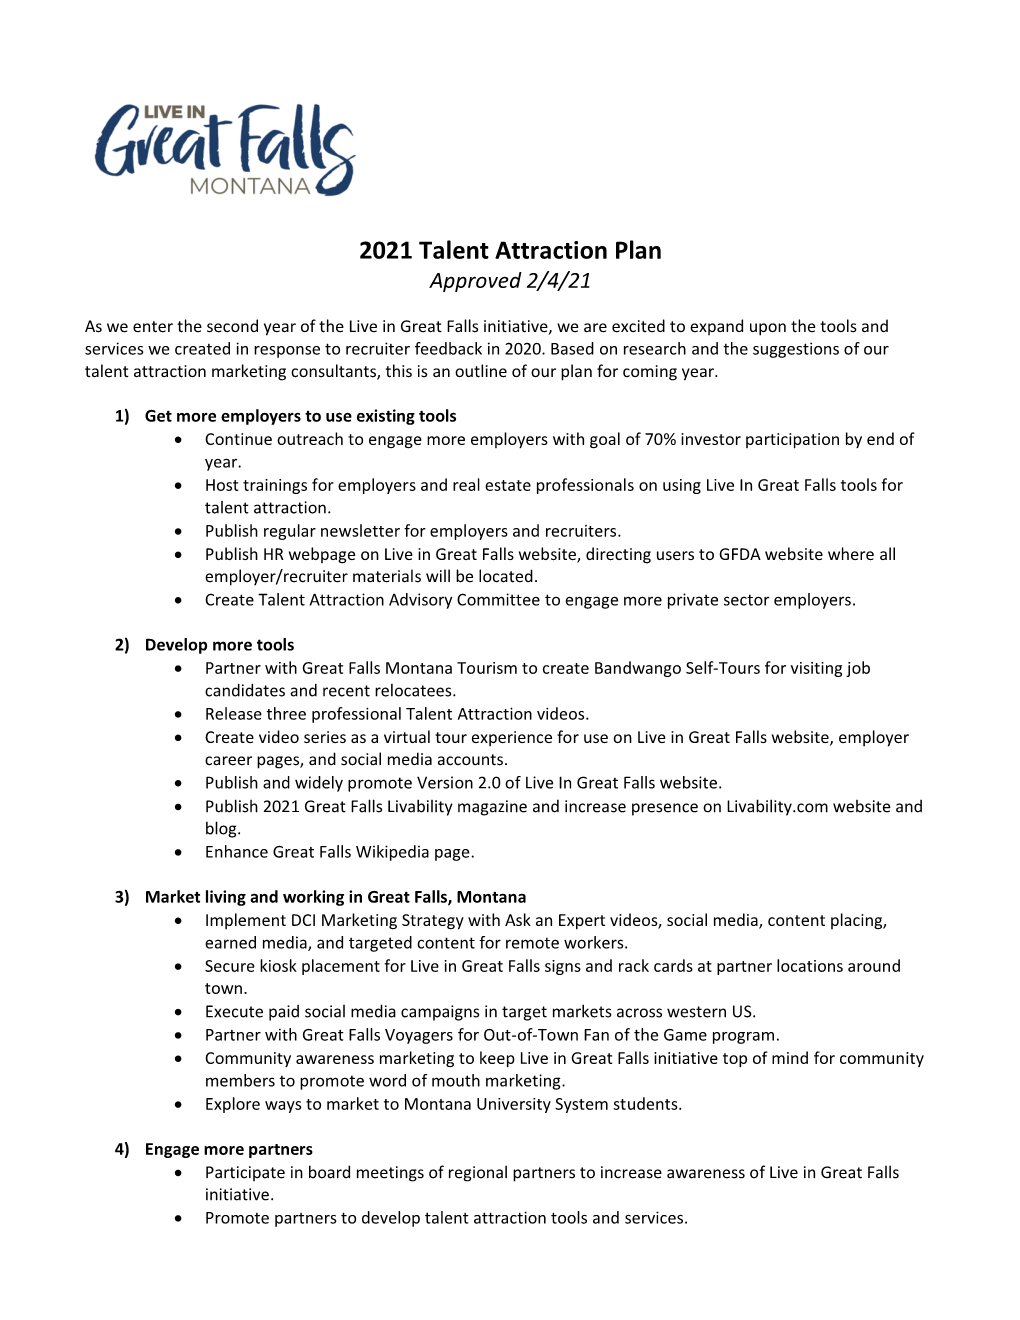 2021 Talent Attraction Plan Approved 2/4/21